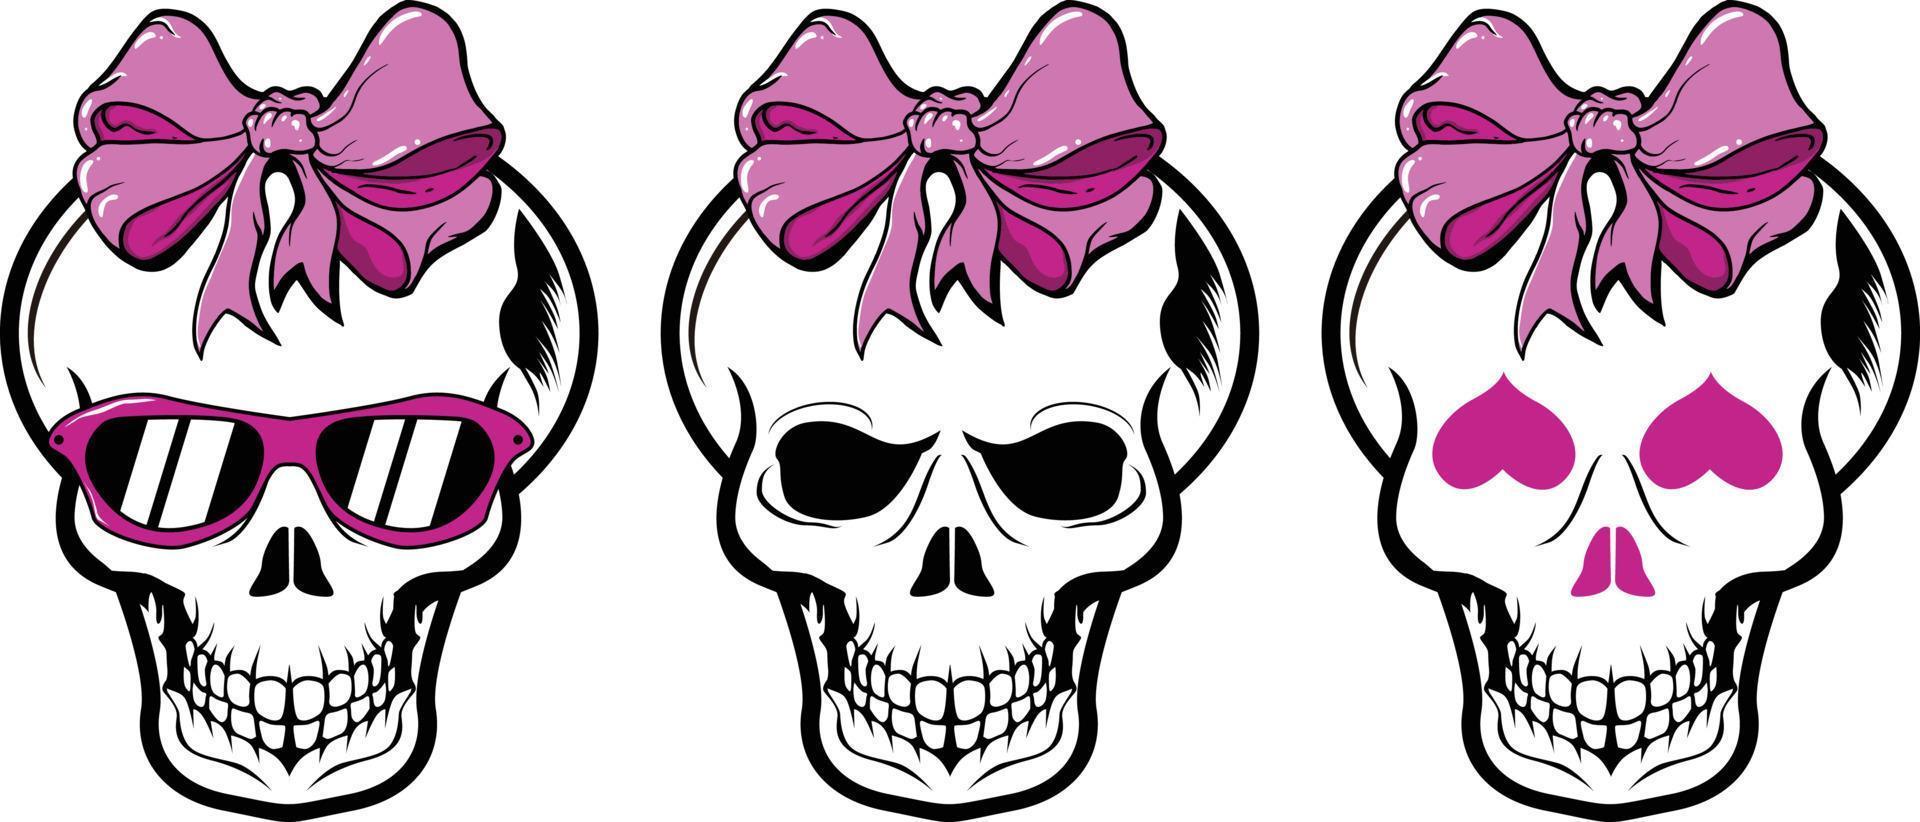 Skull girl  with hat ribbon funny cute vector image illustrations